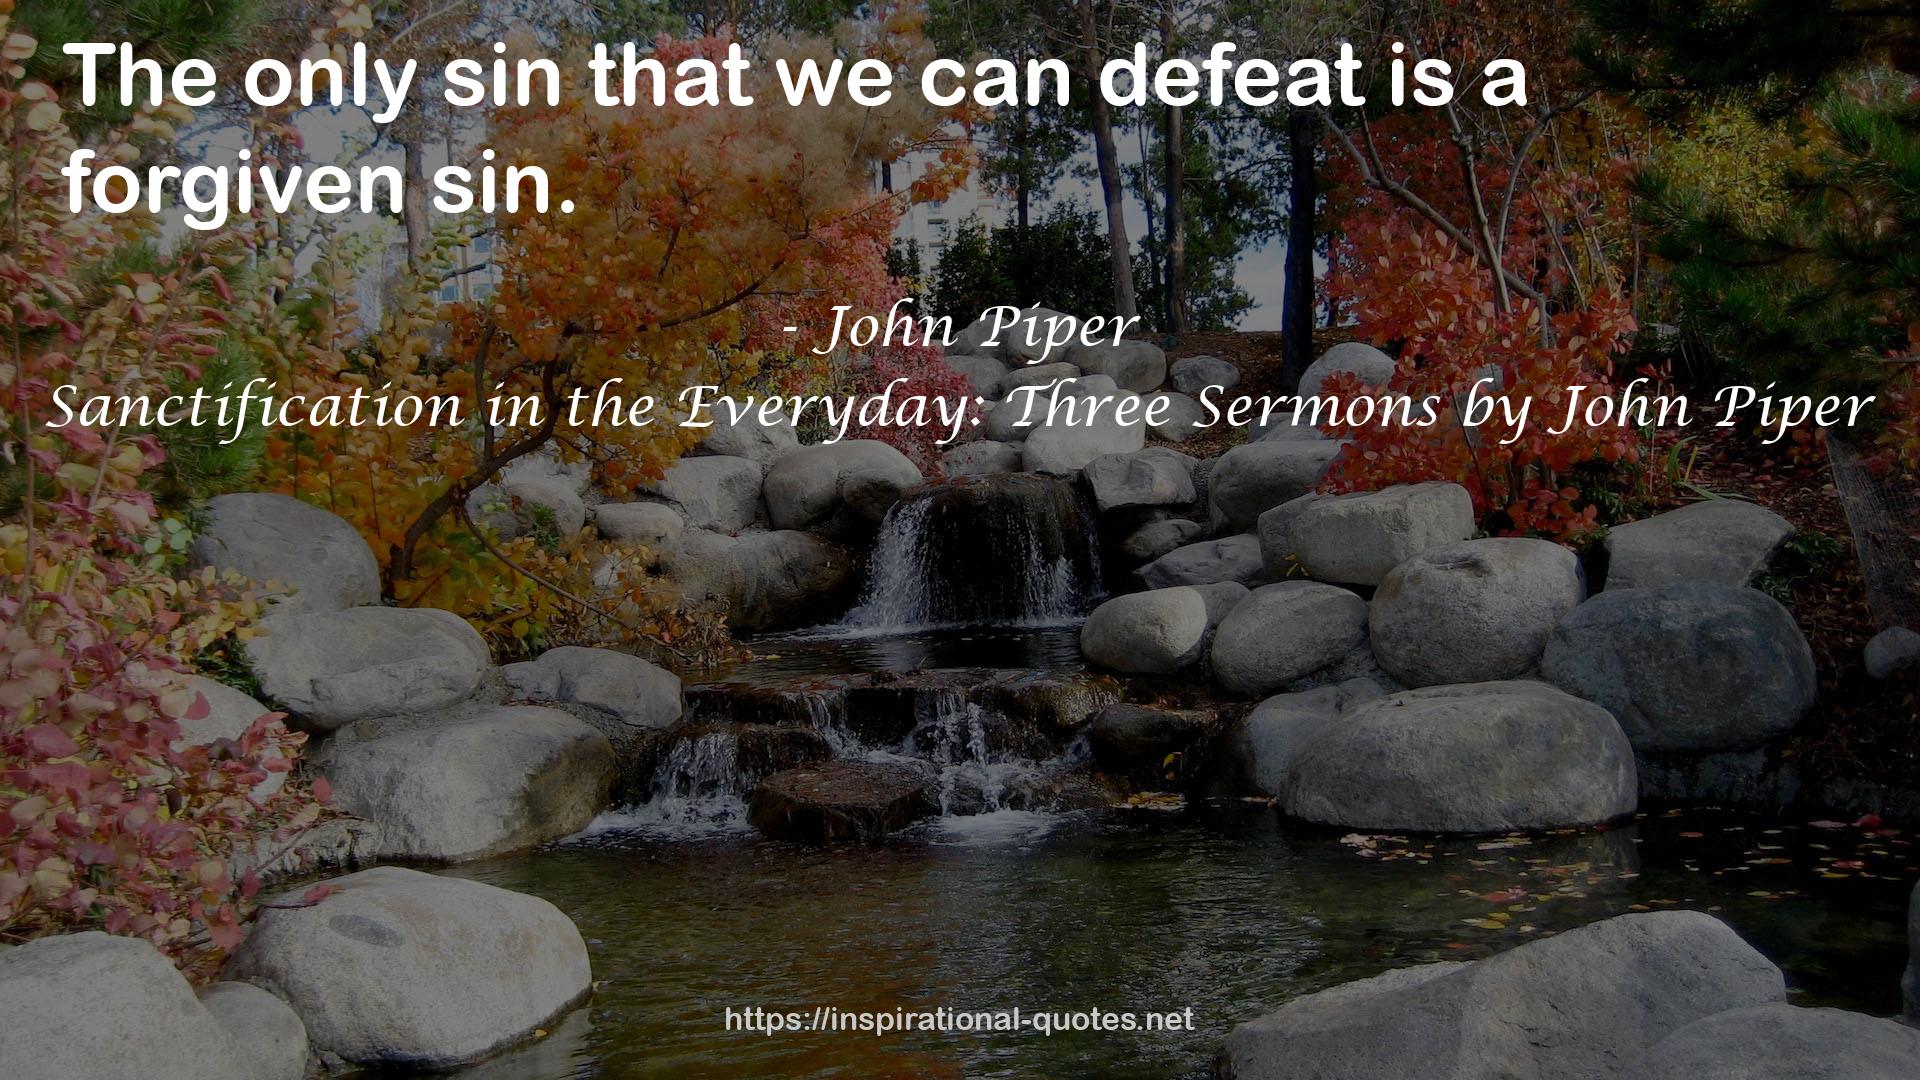 Sanctification in the Everyday: Three Sermons by John Piper QUOTES